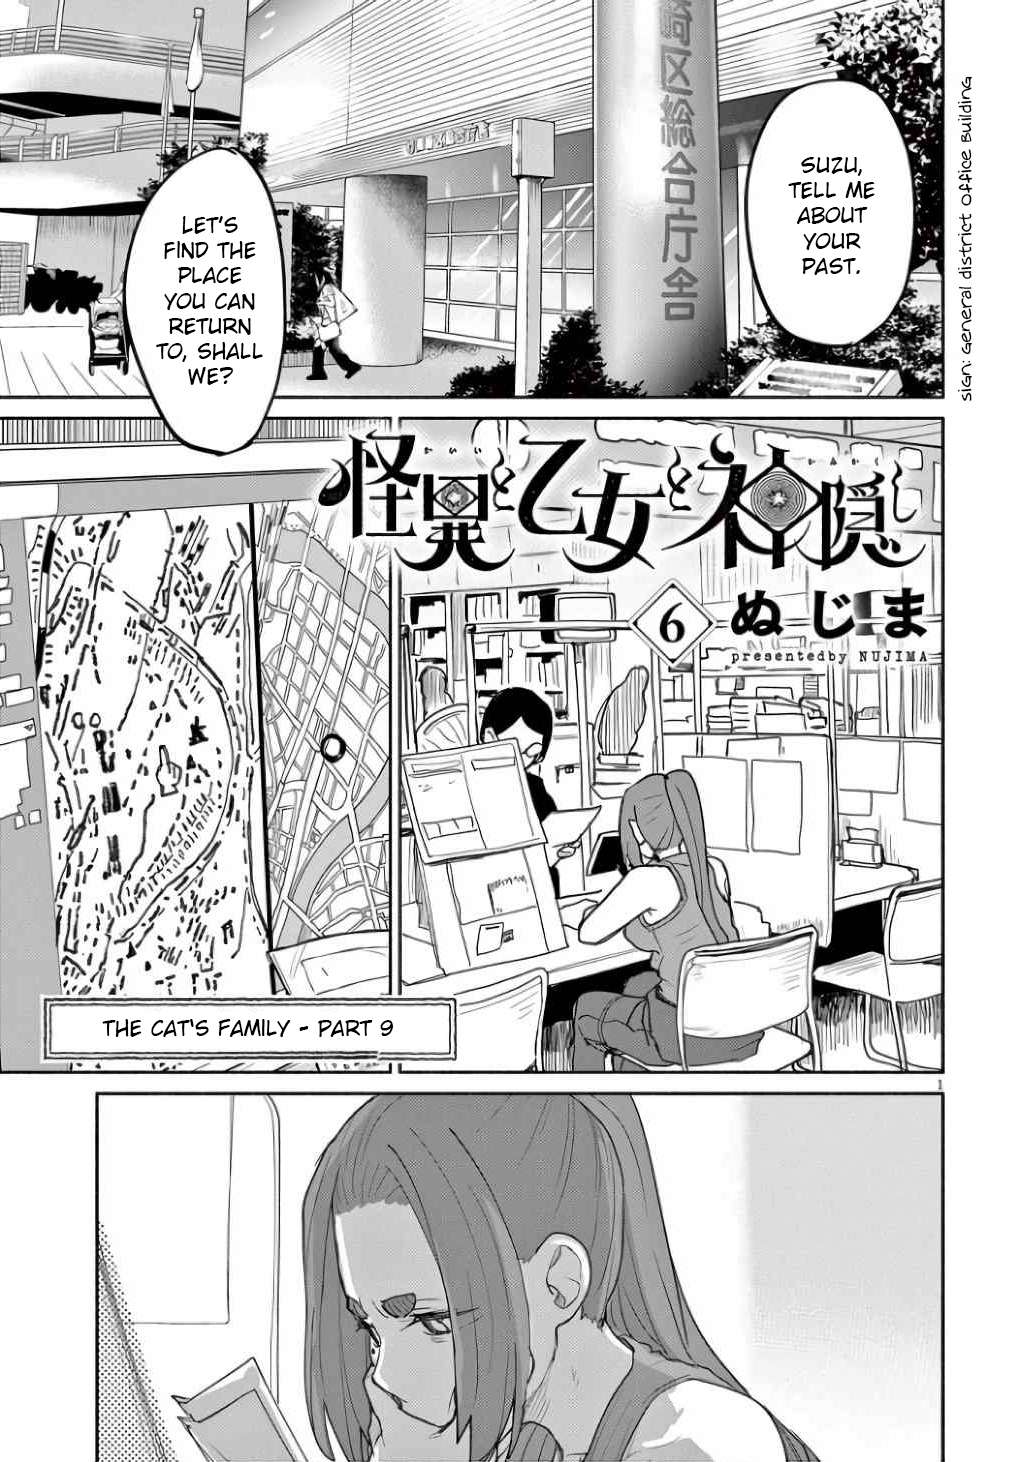 Mysteries, Maidens, And Mysterious Disappearances - chapter 52 - #2